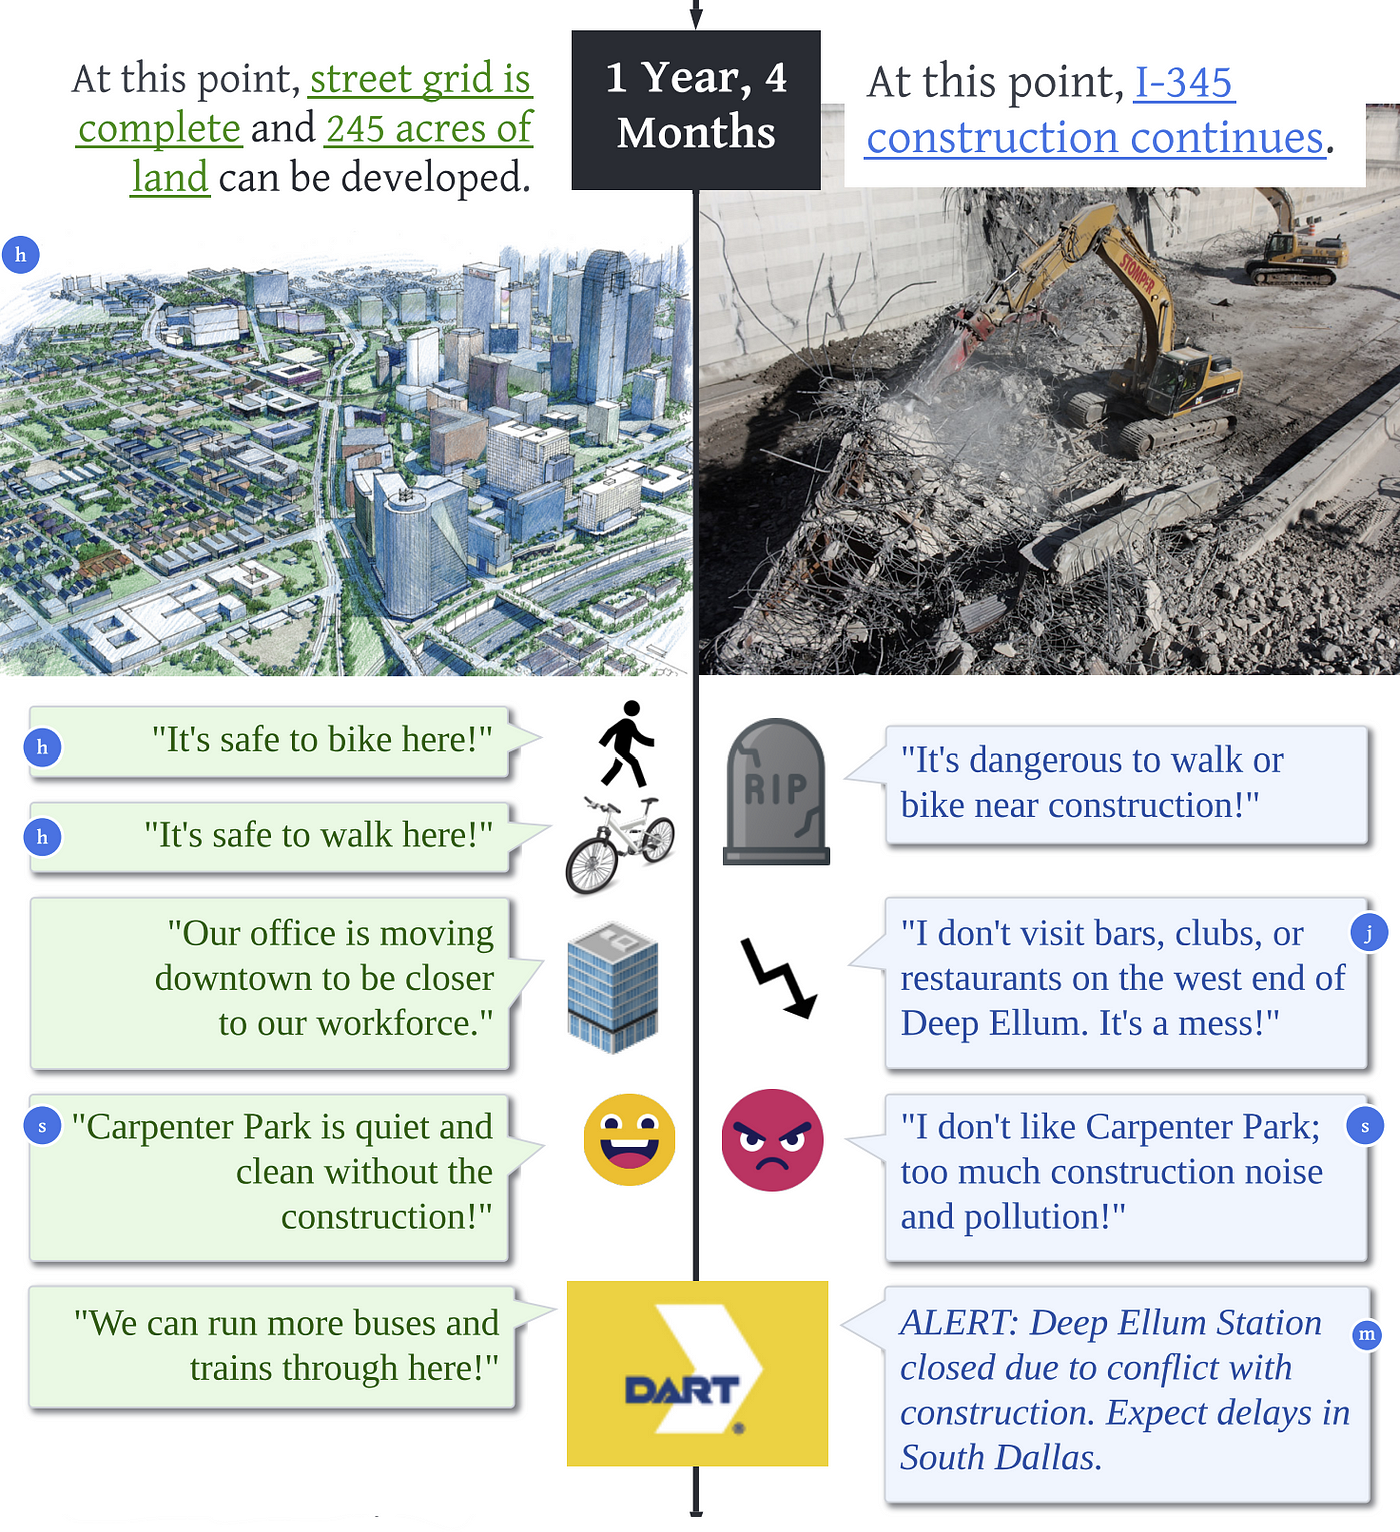 Fifth section of the infographic. After 1 year and 4 months, under the removal path, the street grid is complete, and 245 acres or land are opened for development. Under the rebuild path, construction is still several years away from completion.